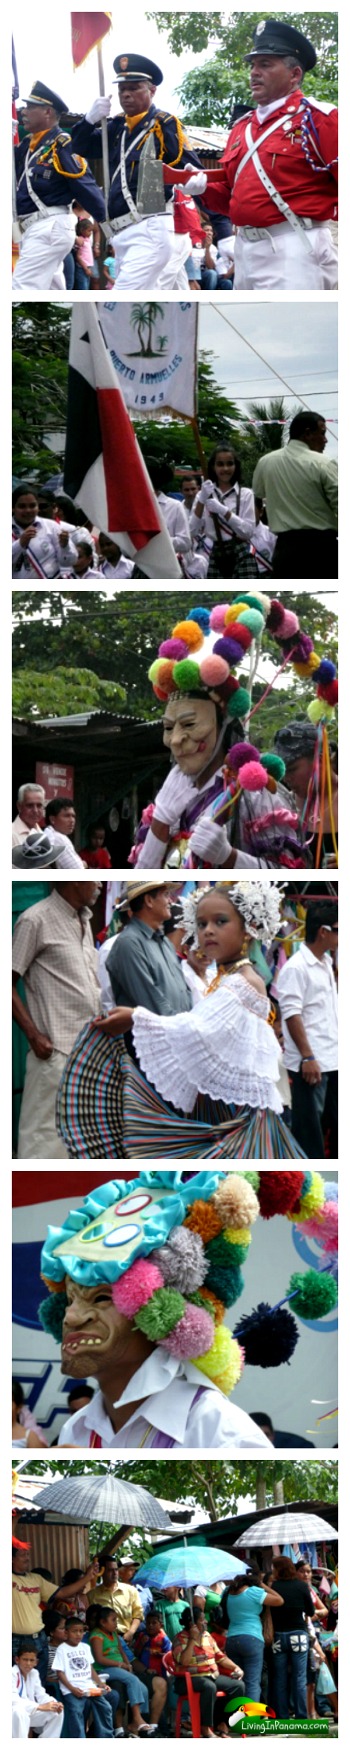 6 different photos of close up of parades in panama - vertical row 